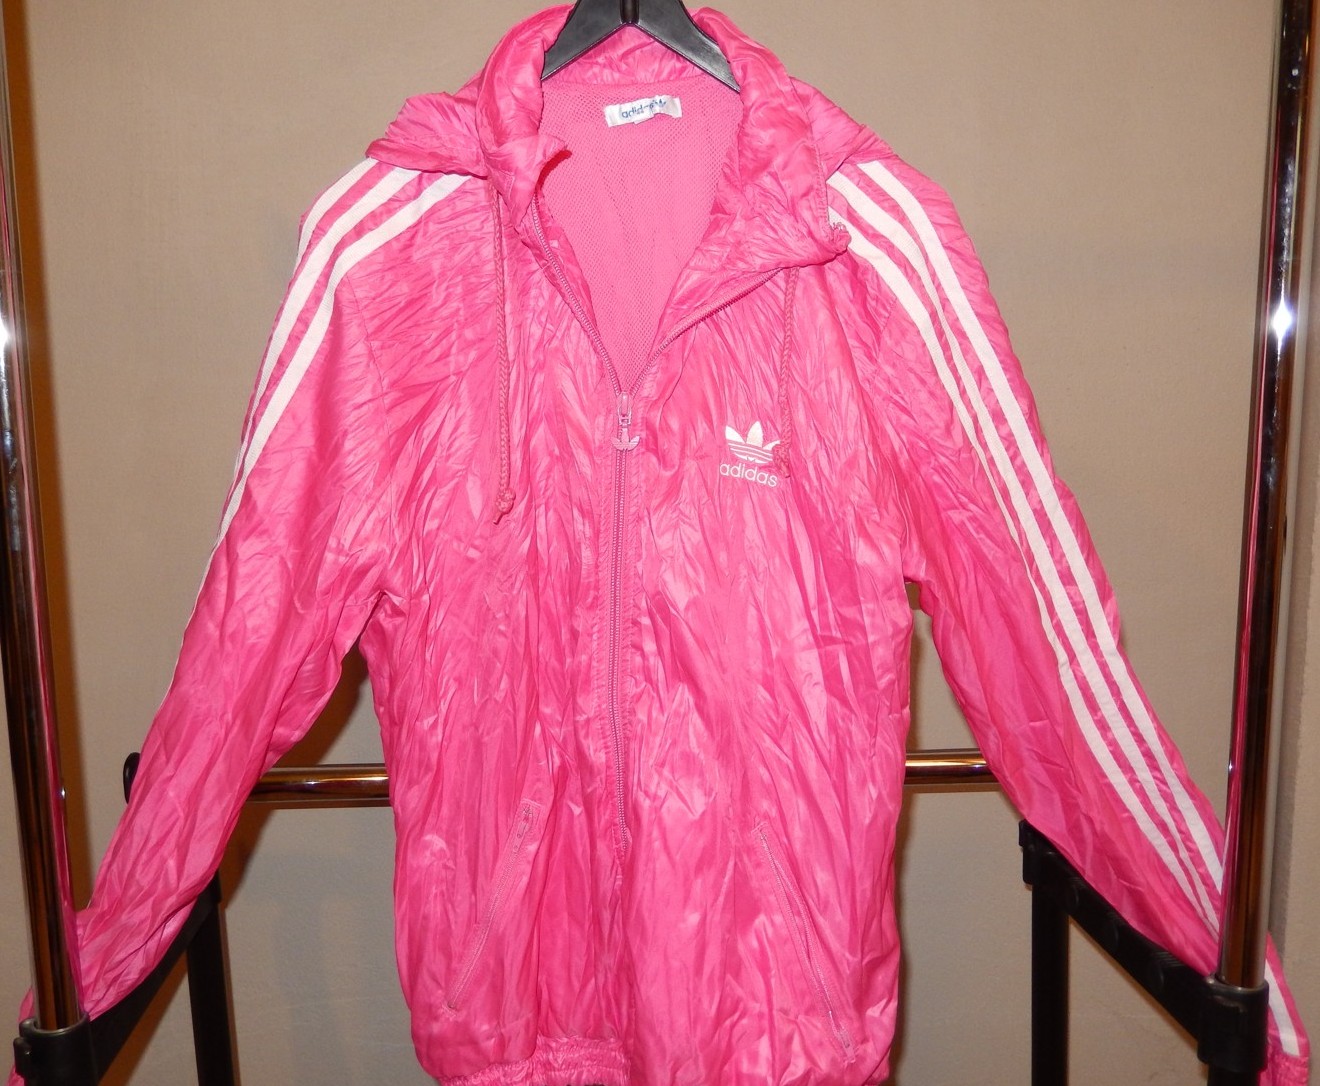 Adidas WB CR pink/white. 3 years old. was too hot in the dryer ;(